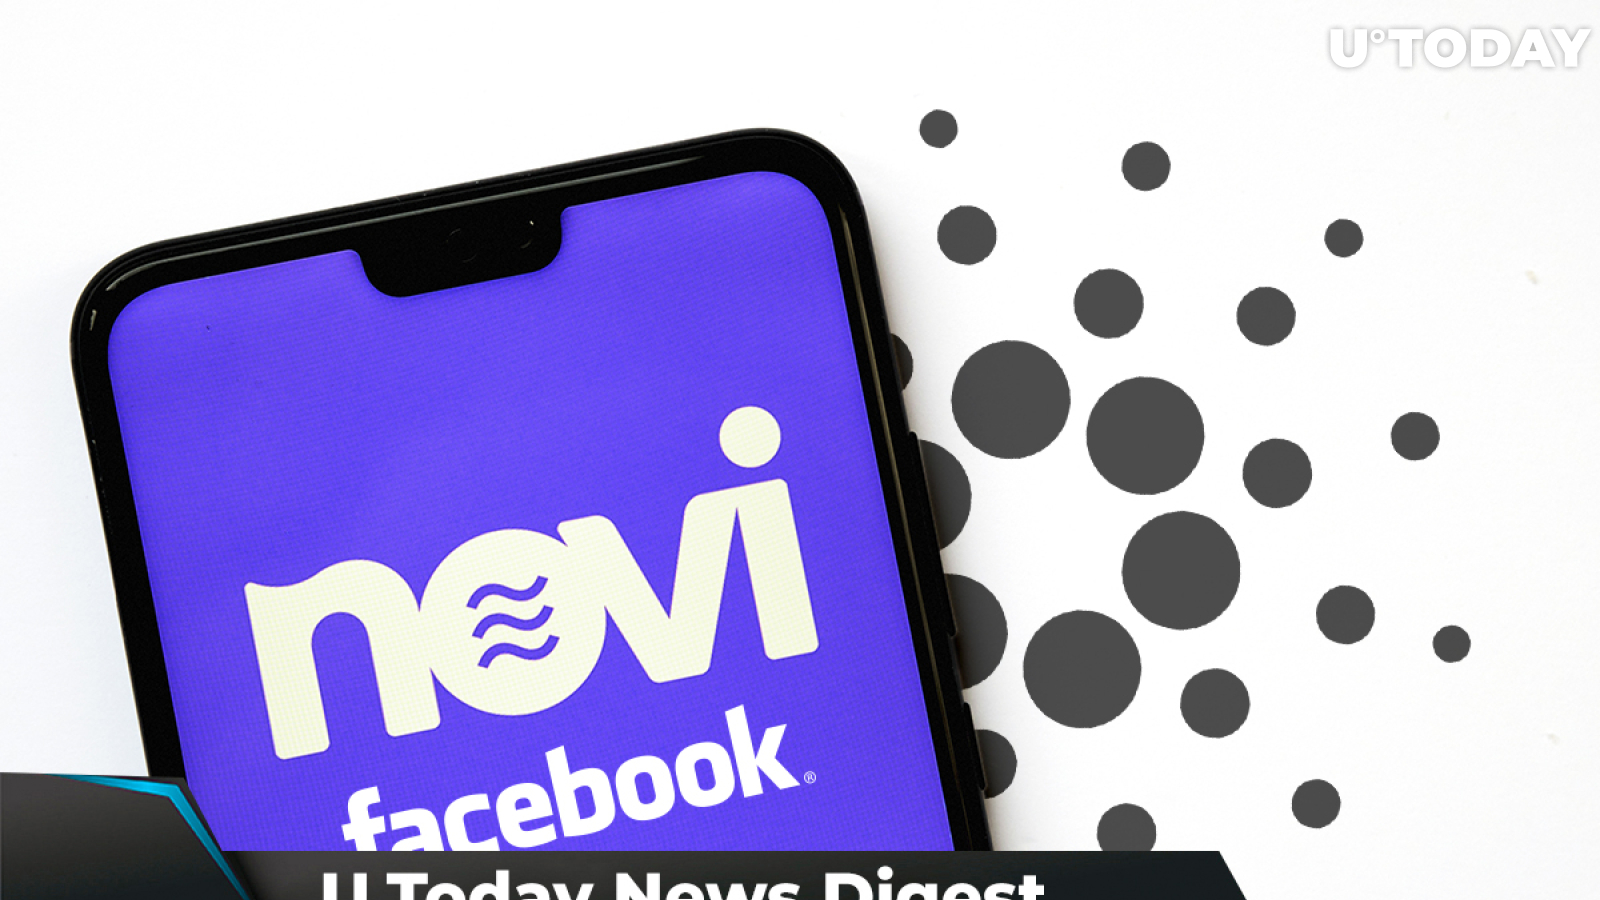 10,000 BTC Sell Order Filed on OKEx, Cardano Traders Long Again, Facebook Pilots Its Crypto Wallet: Crypto News Digest by U.Today